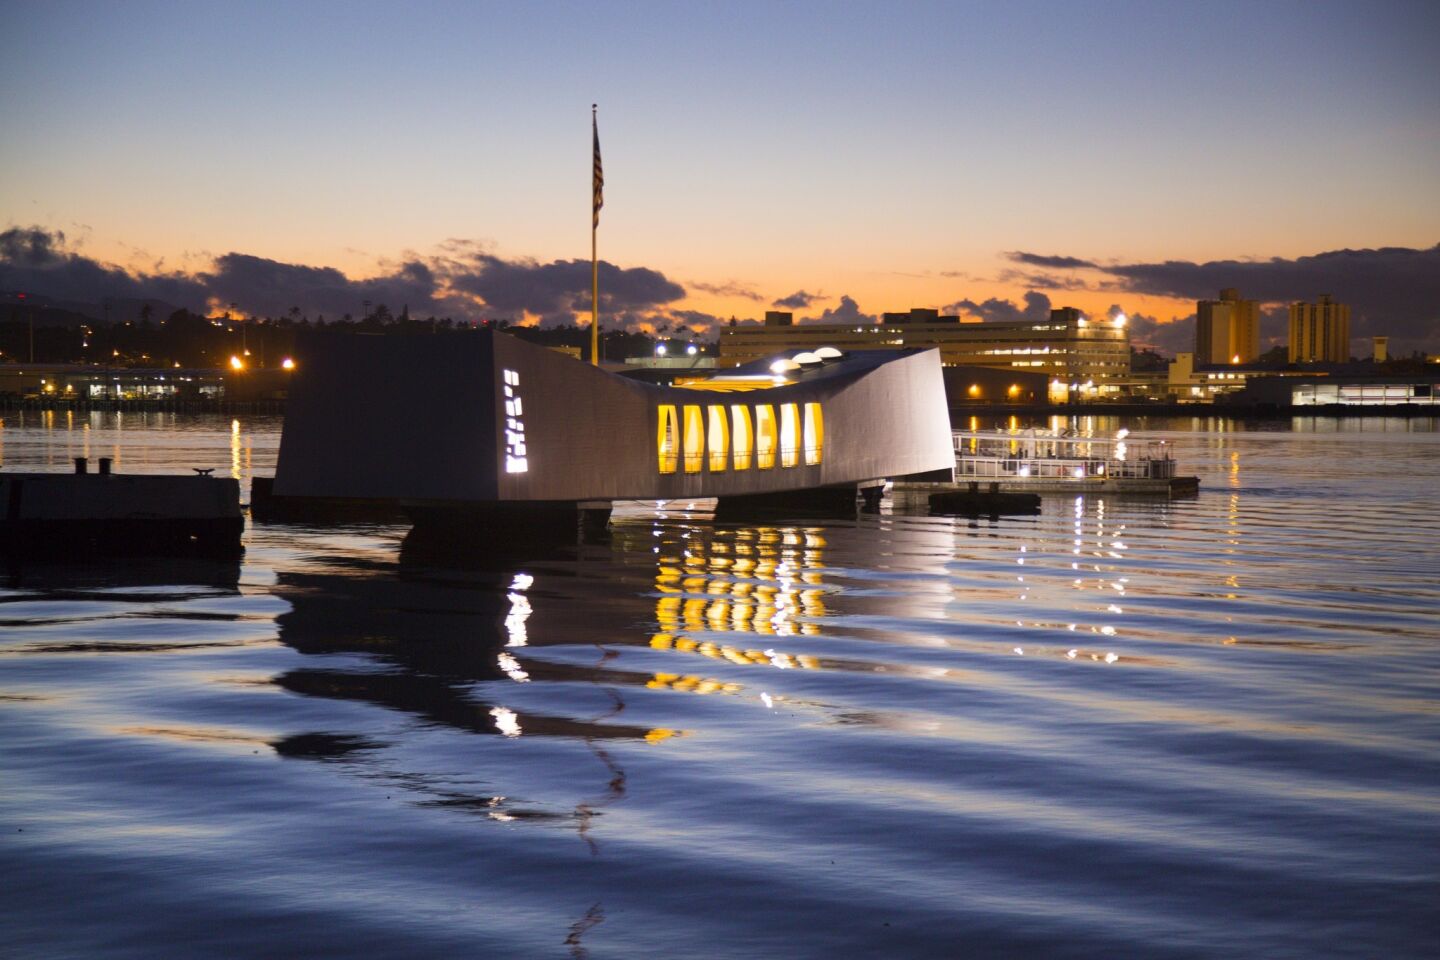 The sun prepares to rise behind the battleship USS Arizona Memorial at Pearl Harbor Hawaii, as commemorations continue leading up to Wednesday, the 75th anniversary of the Japanese attack on Pearl Harbor, December 7, 1941, thrusting The United States into World War II.